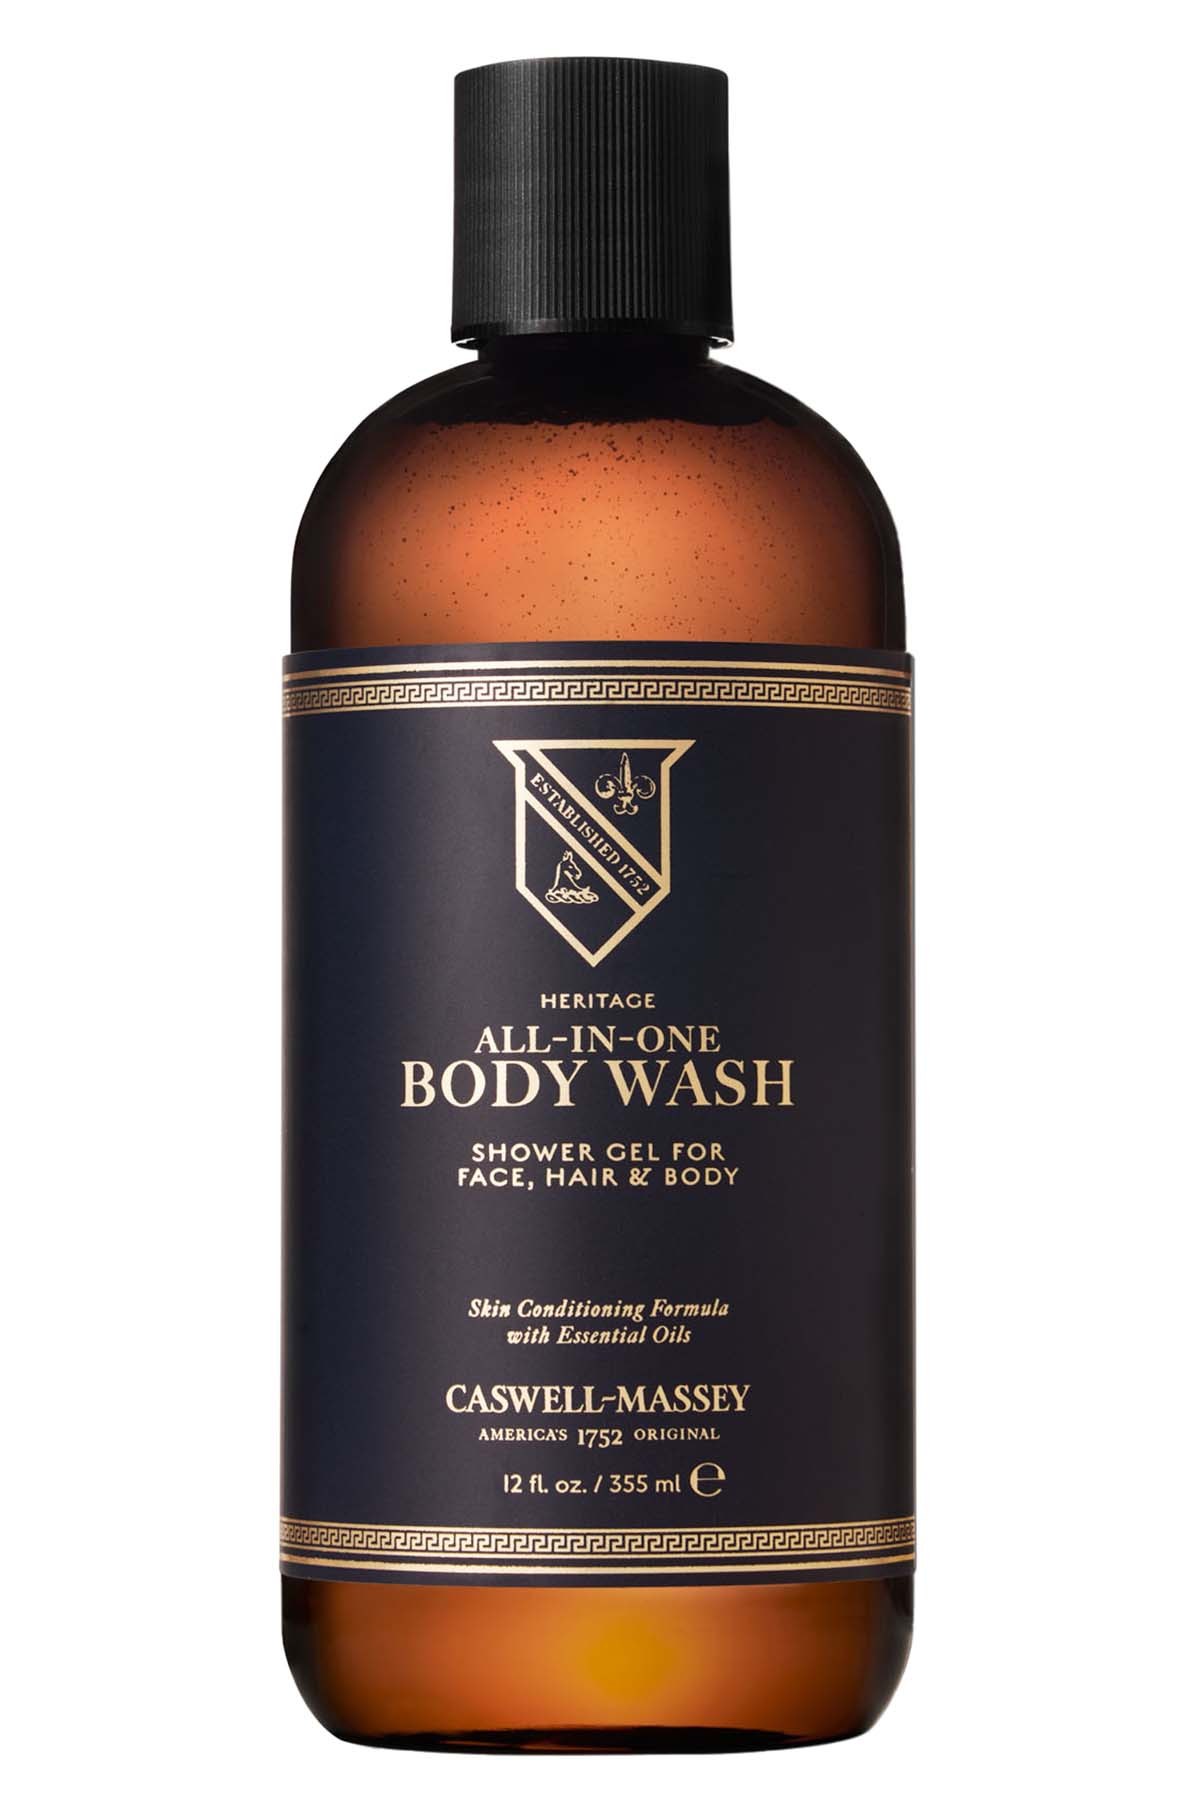 Caswell Massey All-In-One Body Wash 12oz